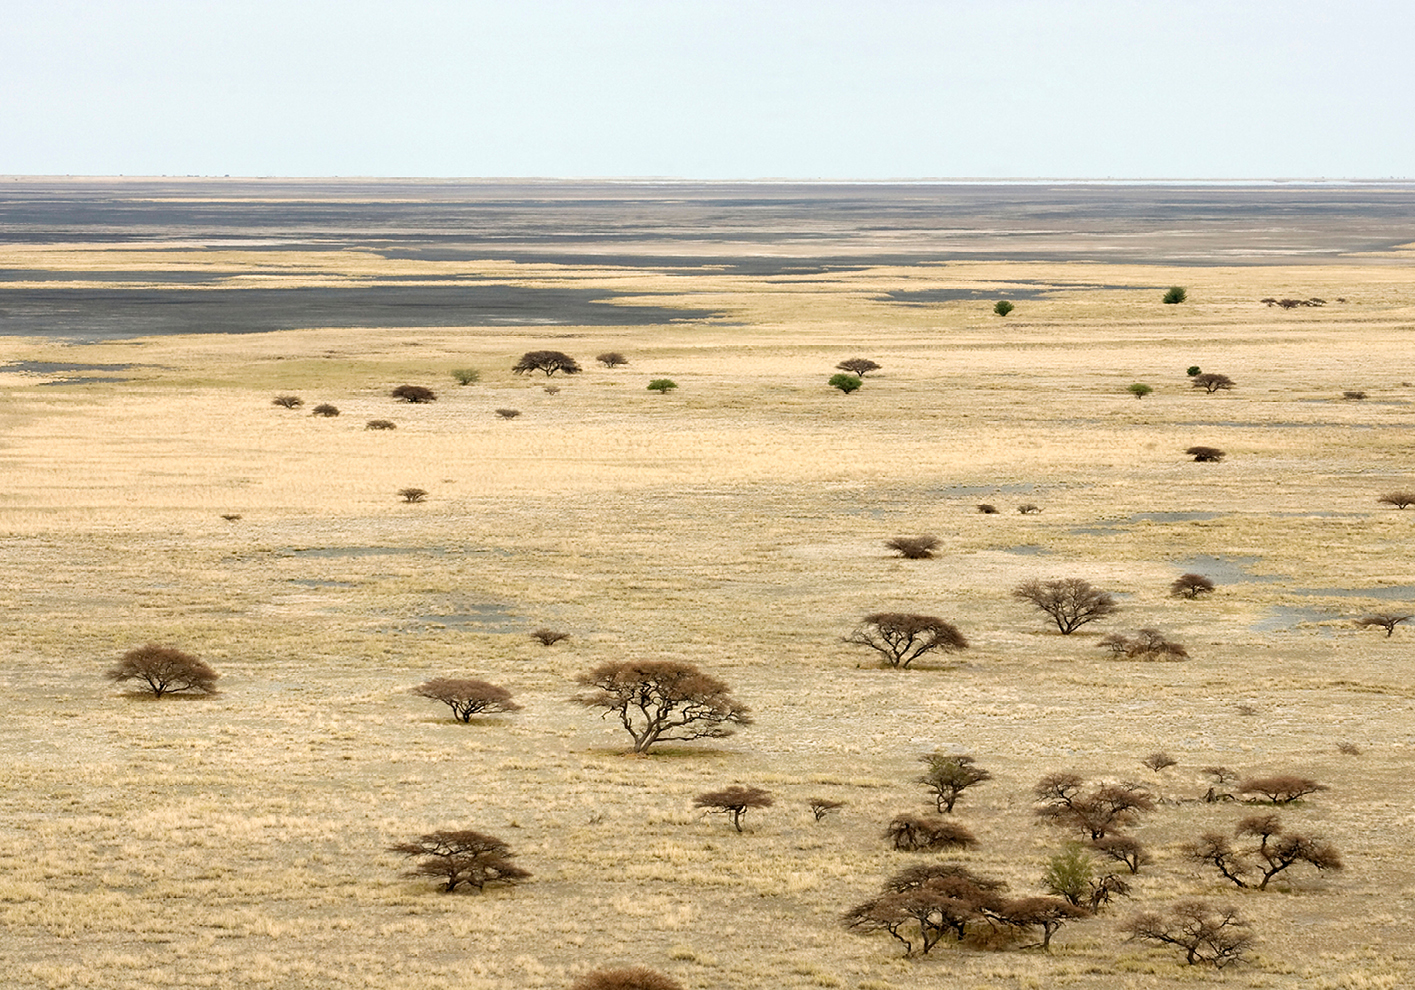 The Kalahari grasslands dotted with ancient baobab trees